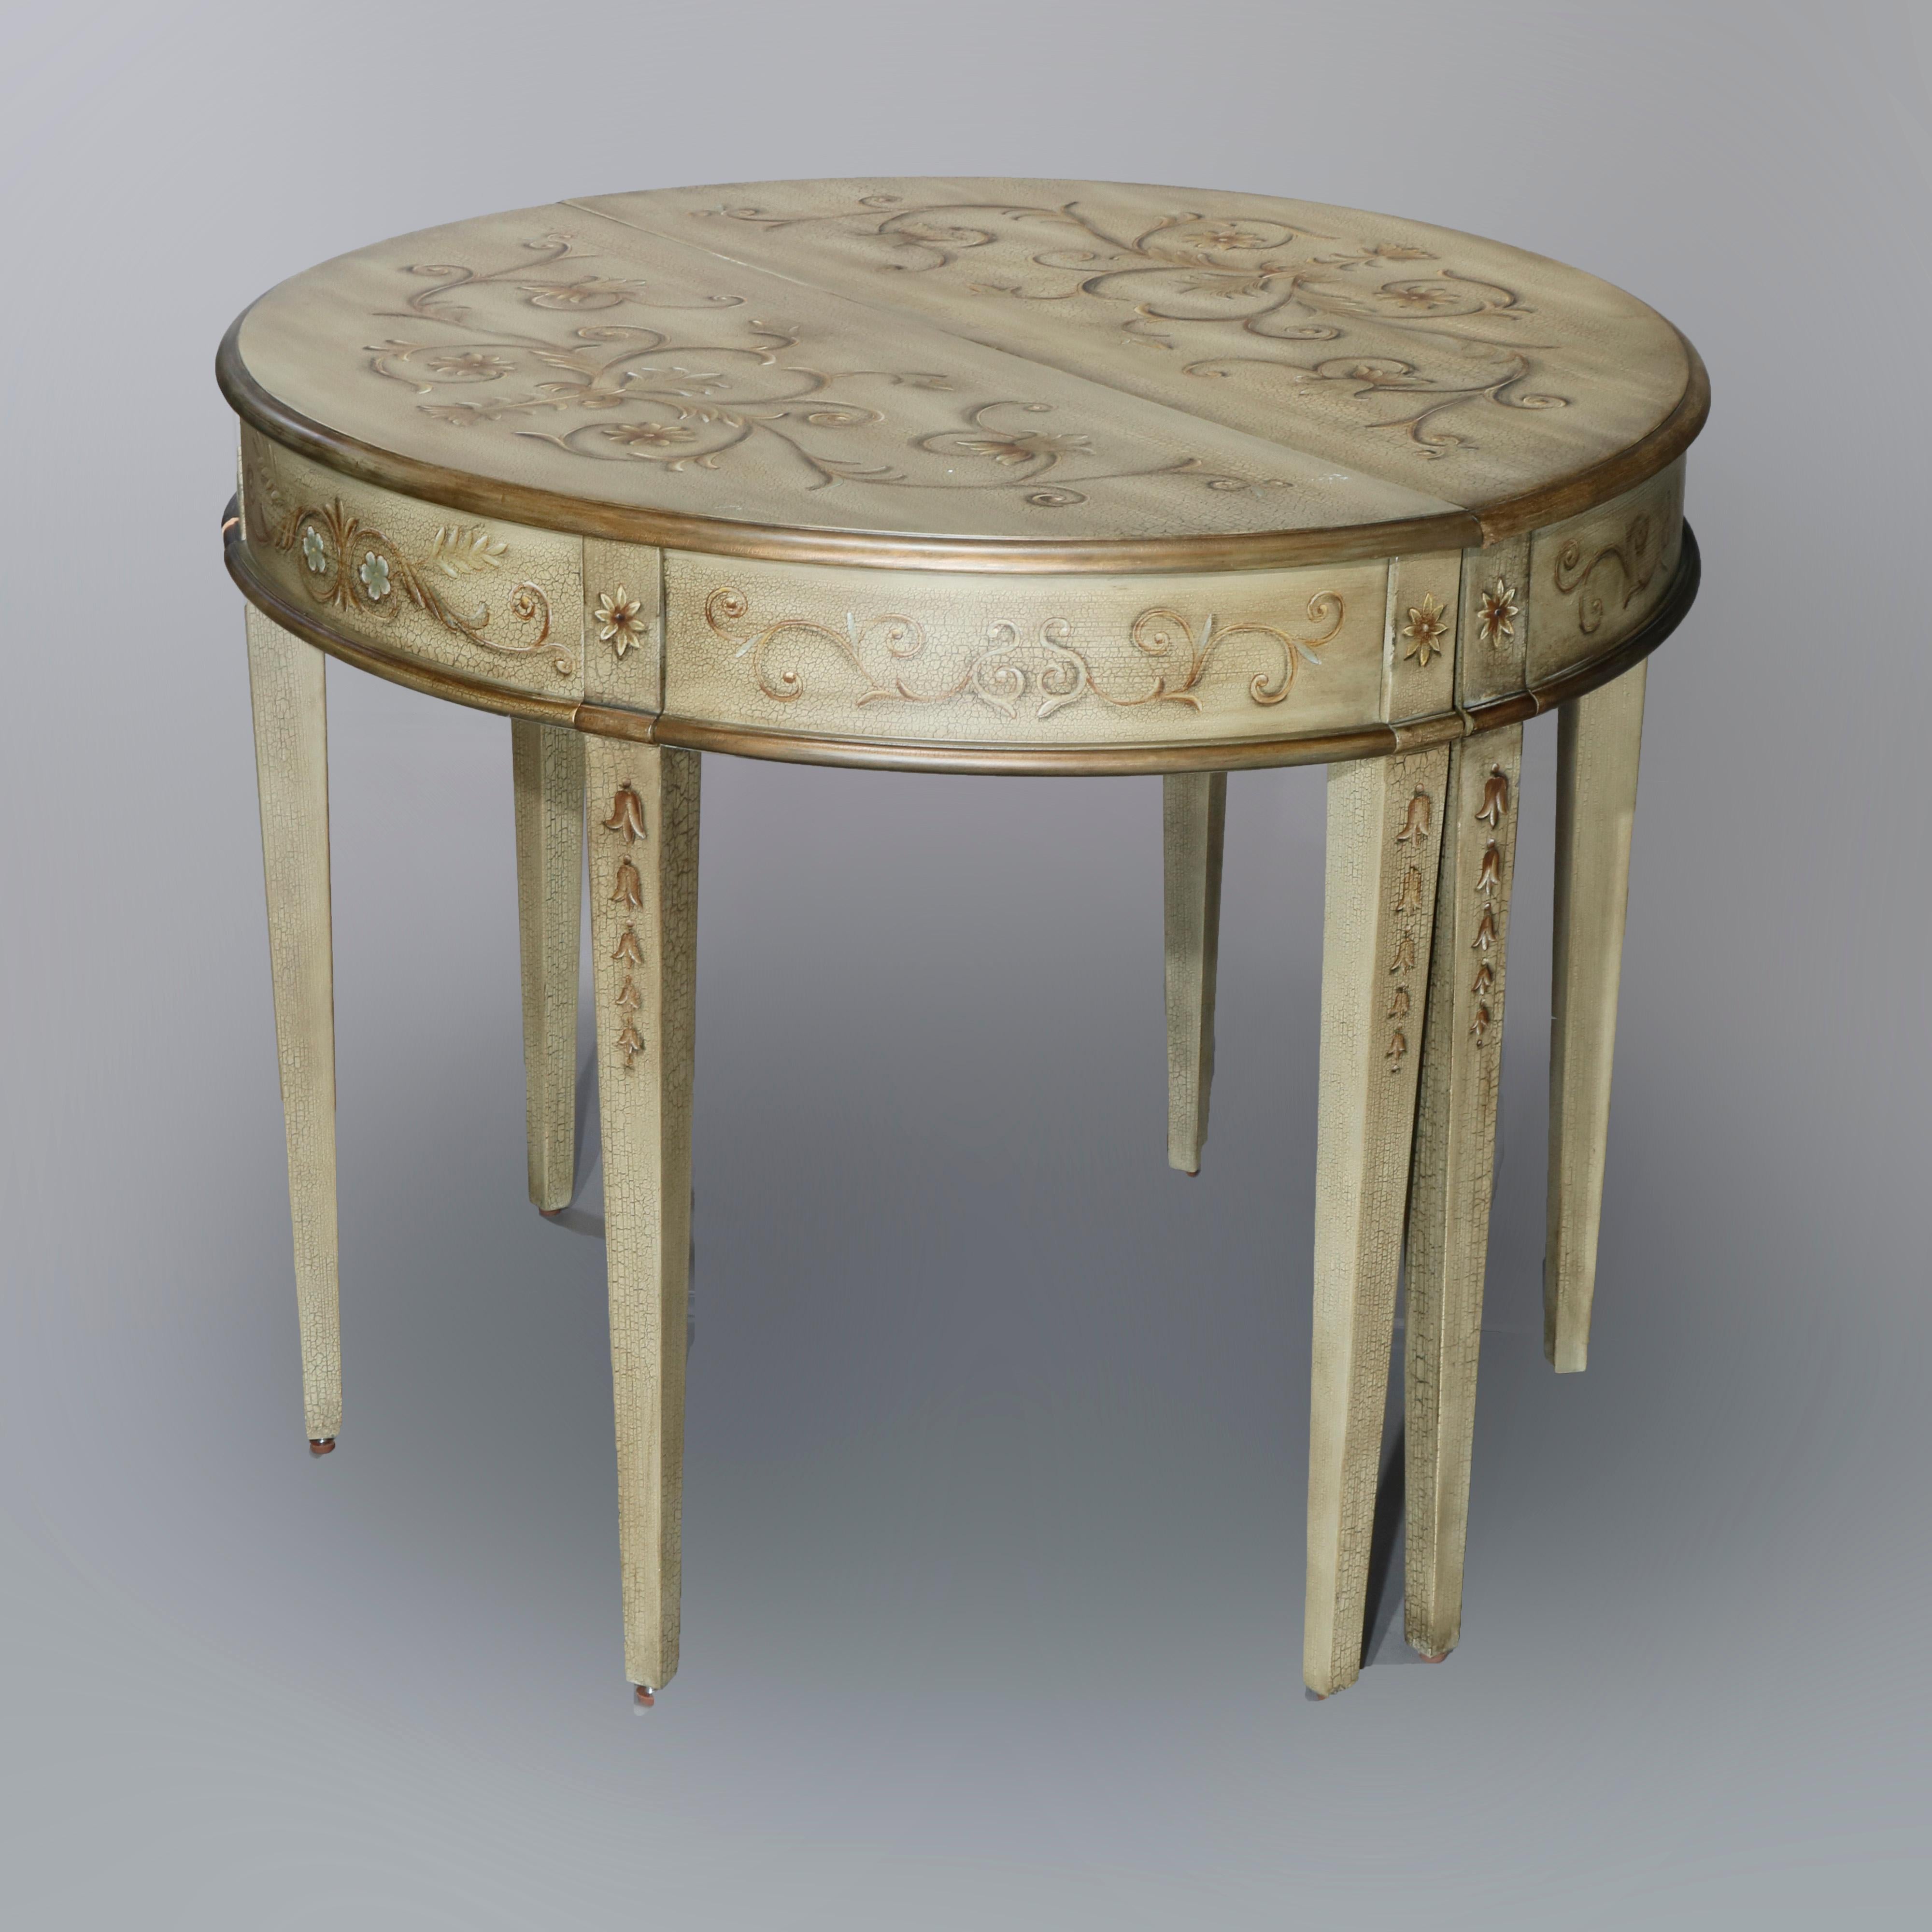 An antique matching set of English paint decorated console tables offer demilune form with scroll, floral, and foliate designs, raised on square tapered legs having inverted bellflowers, gilt highlights throughout, 20th century

Measures: 31